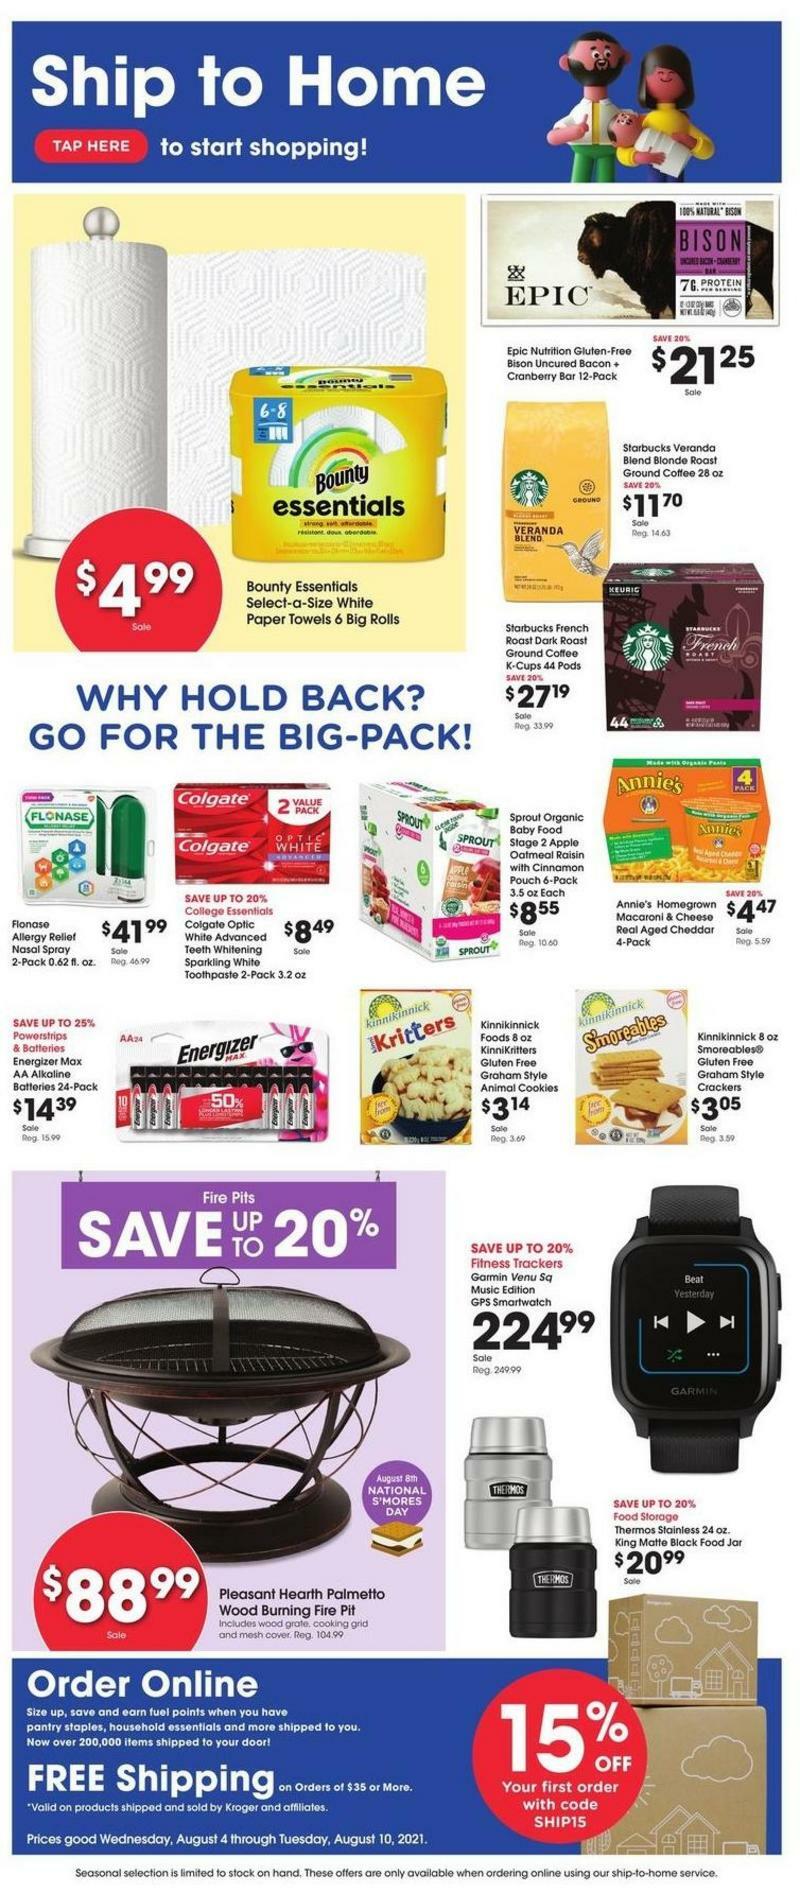 Fred Meyer Ship to Home Weekly Ad from August 4